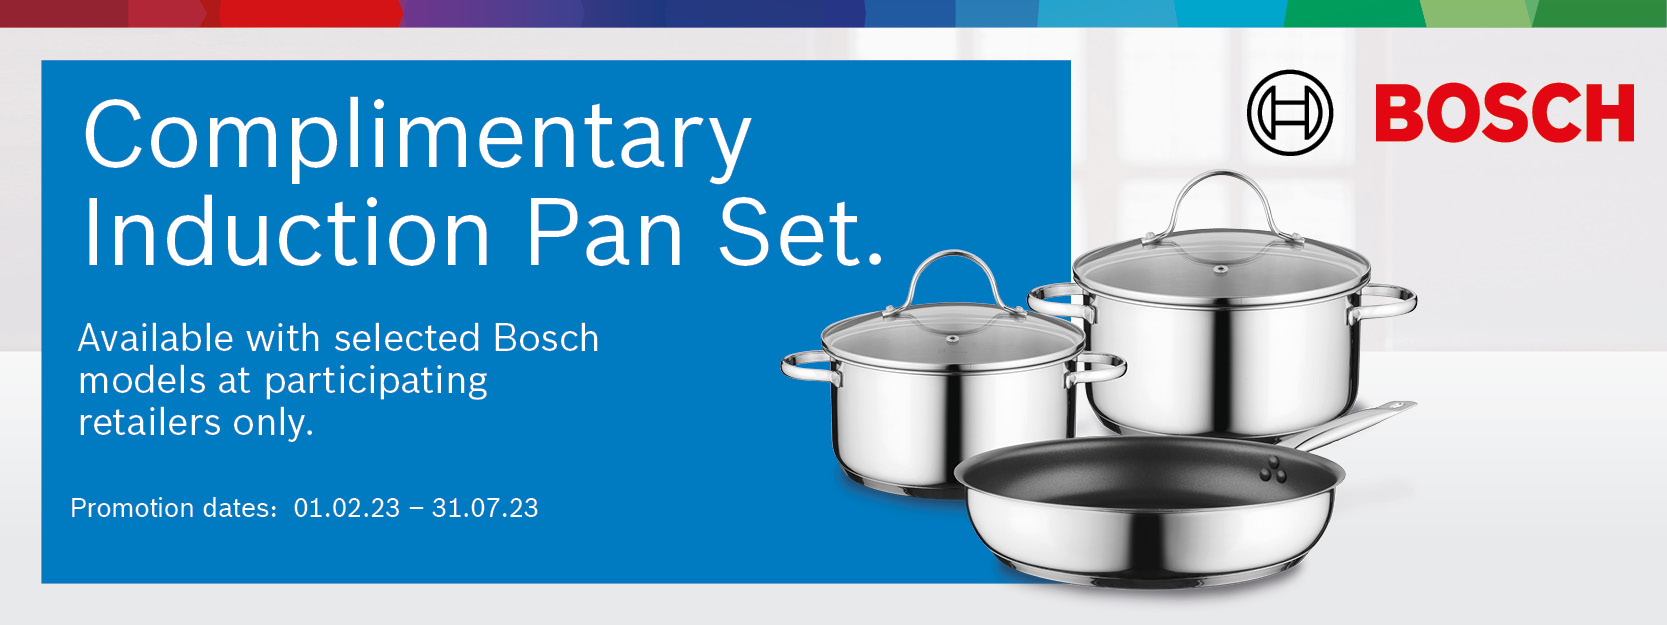 Bosch Complimentary Induction Pan Set (31/07/2023)